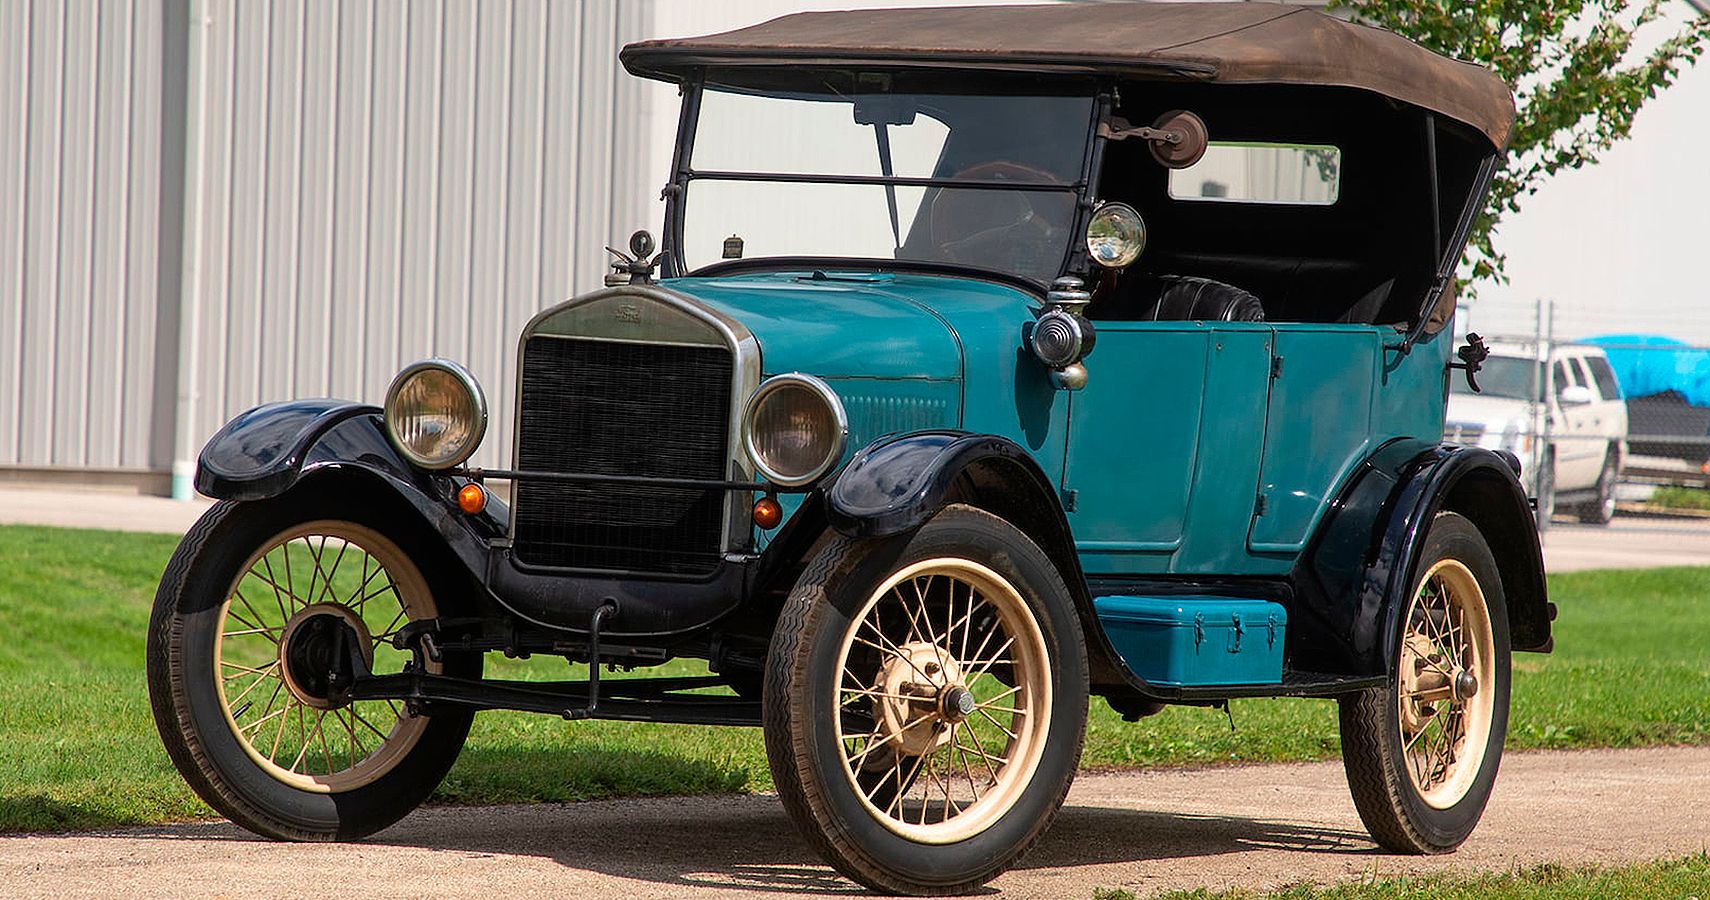 The Ford Model T's Annual Production Figures Were Phenomenal